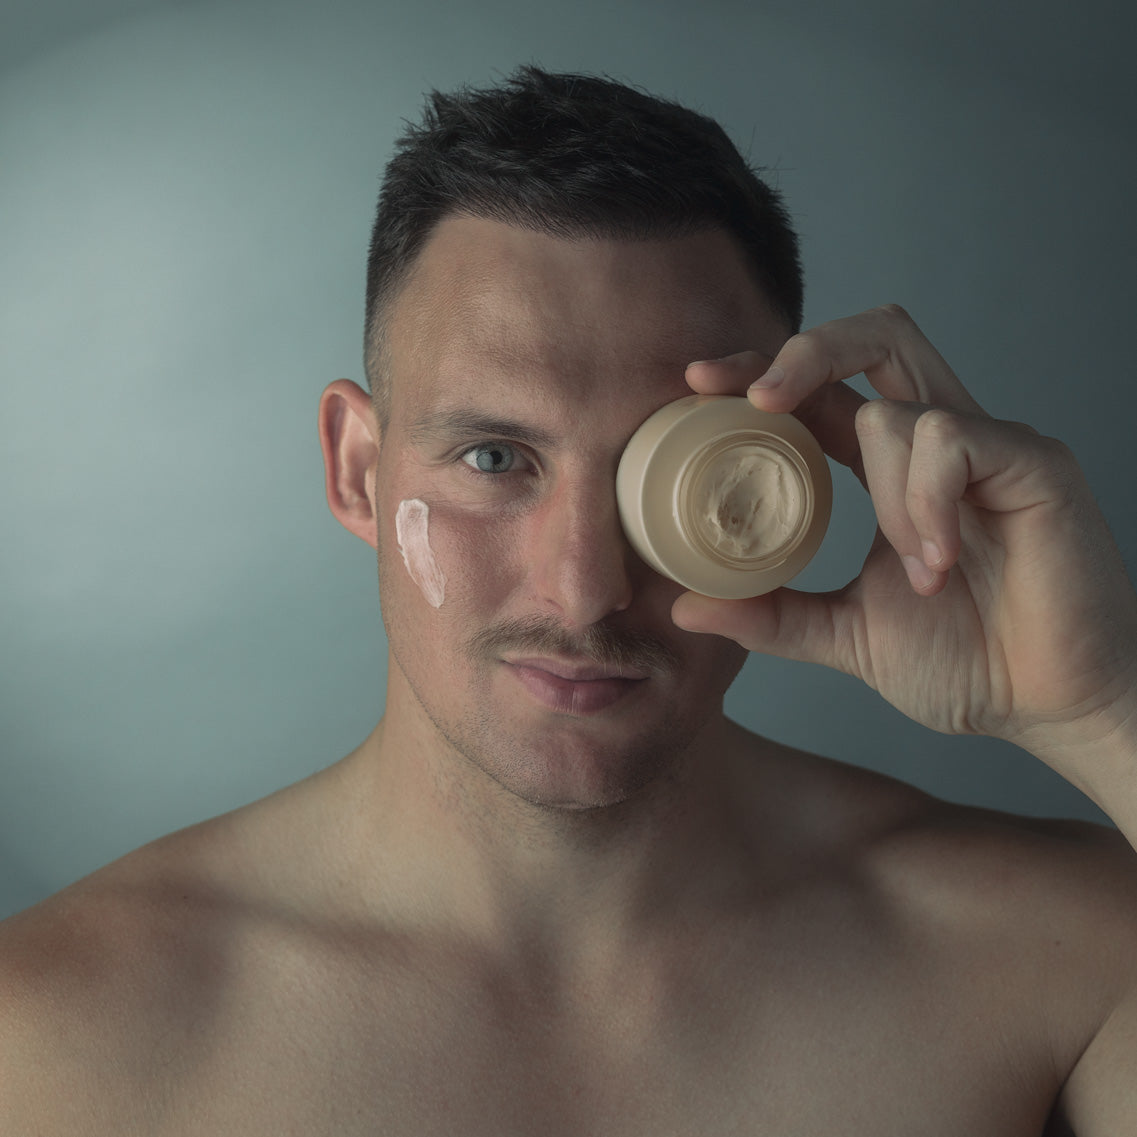 Male holding the water bomb eye cream to the eye